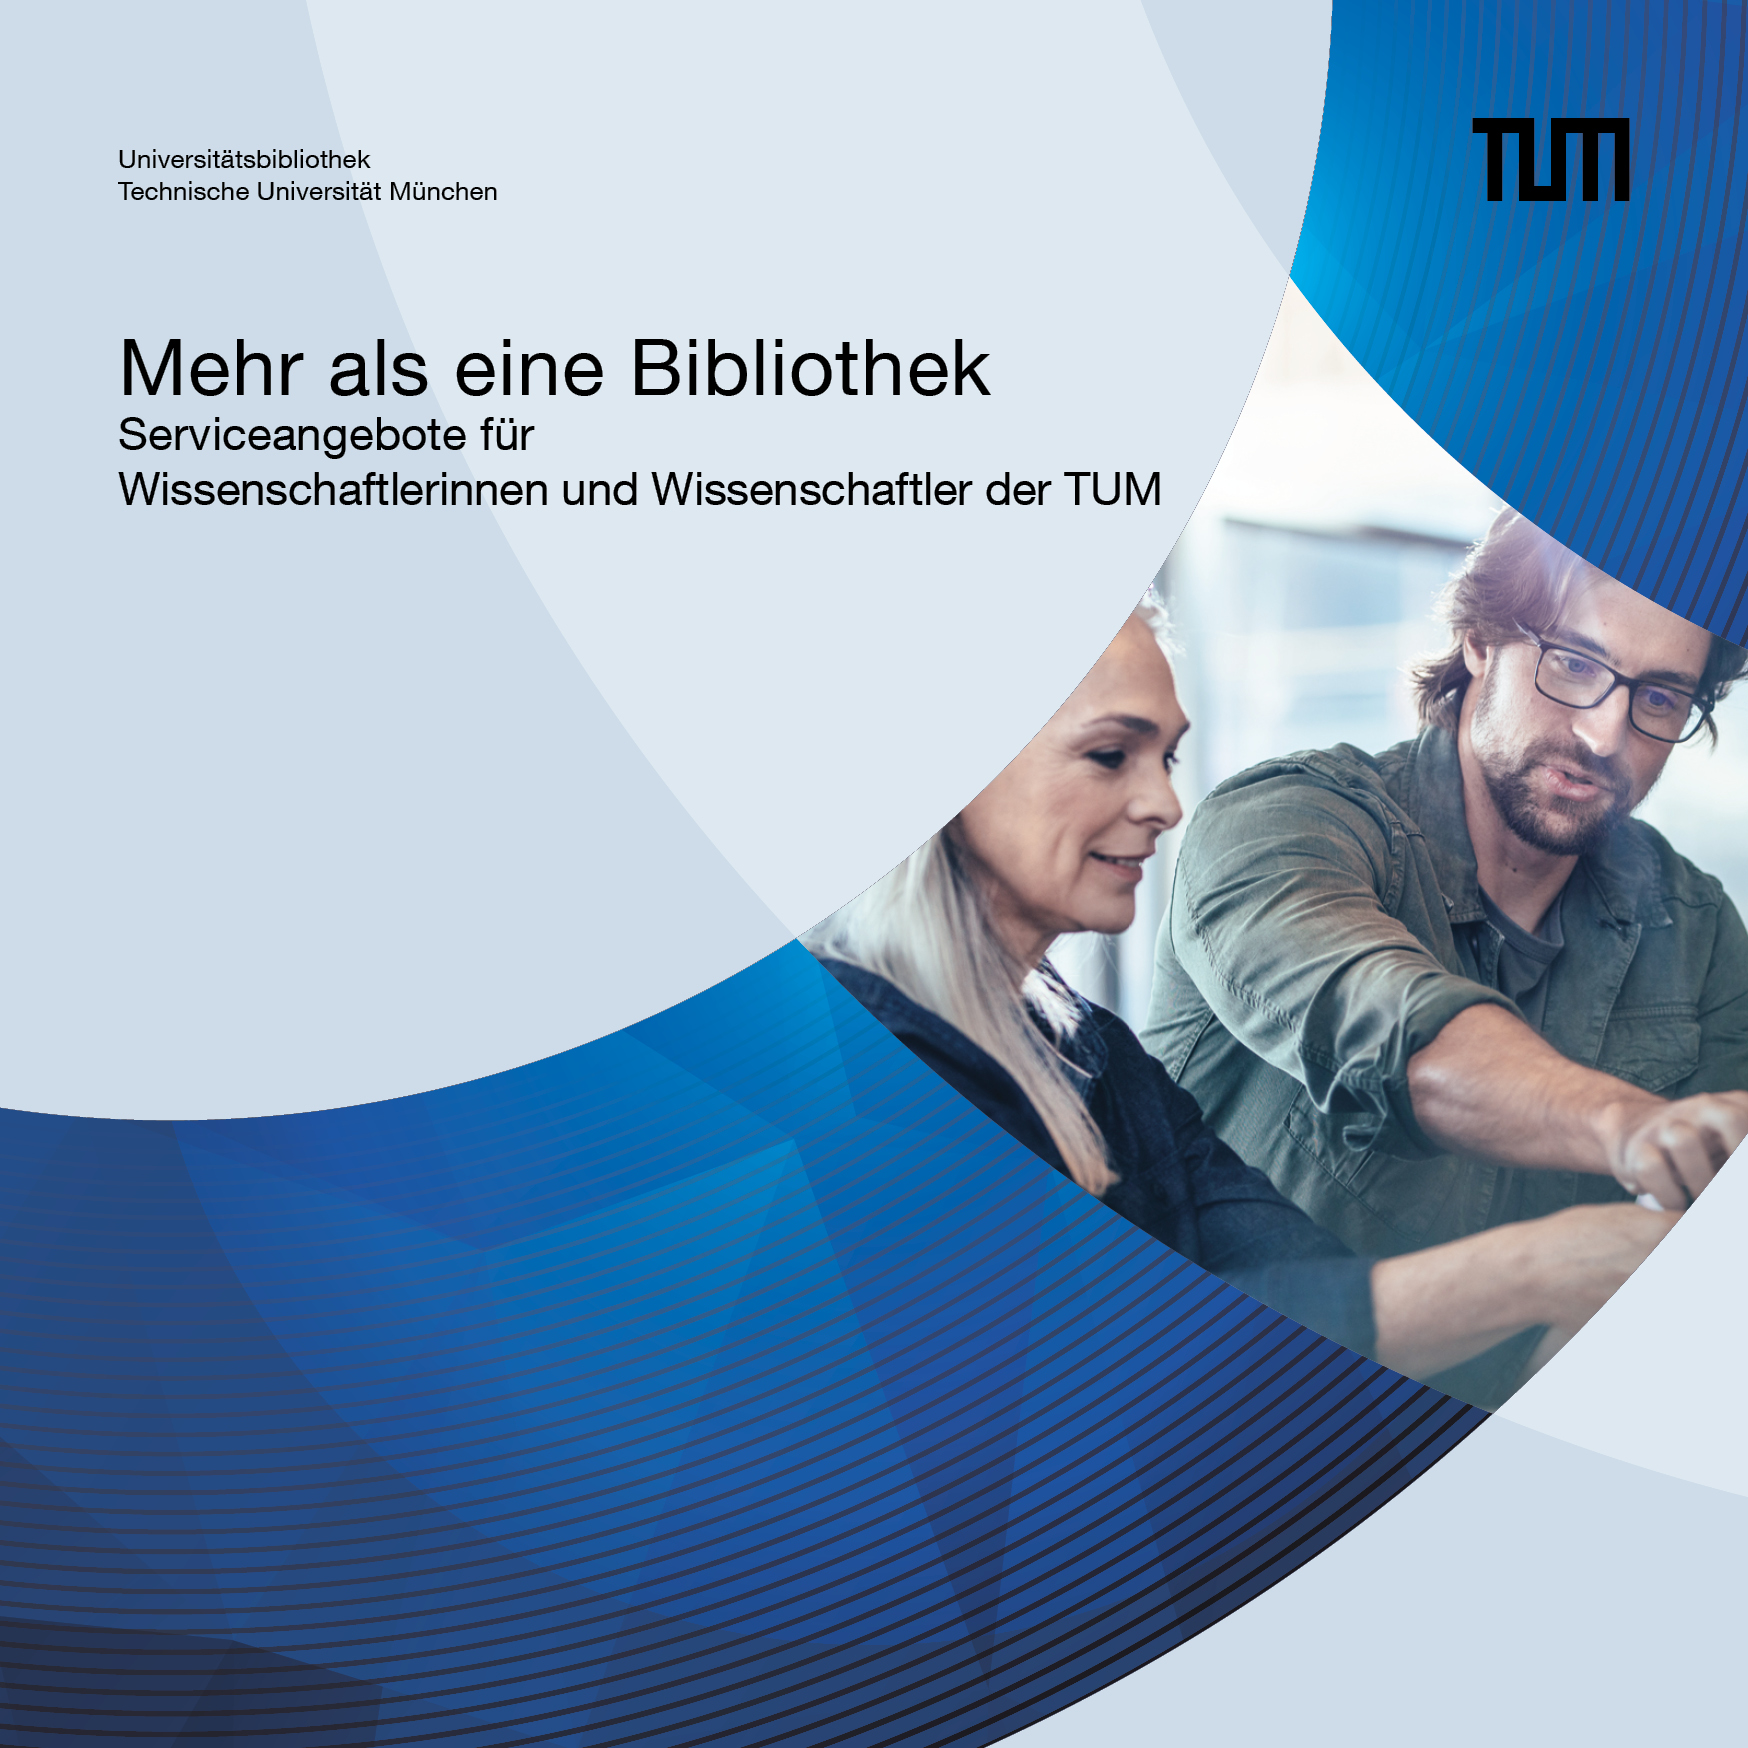 Library brochure: More than just a library – Services for TUM researchers